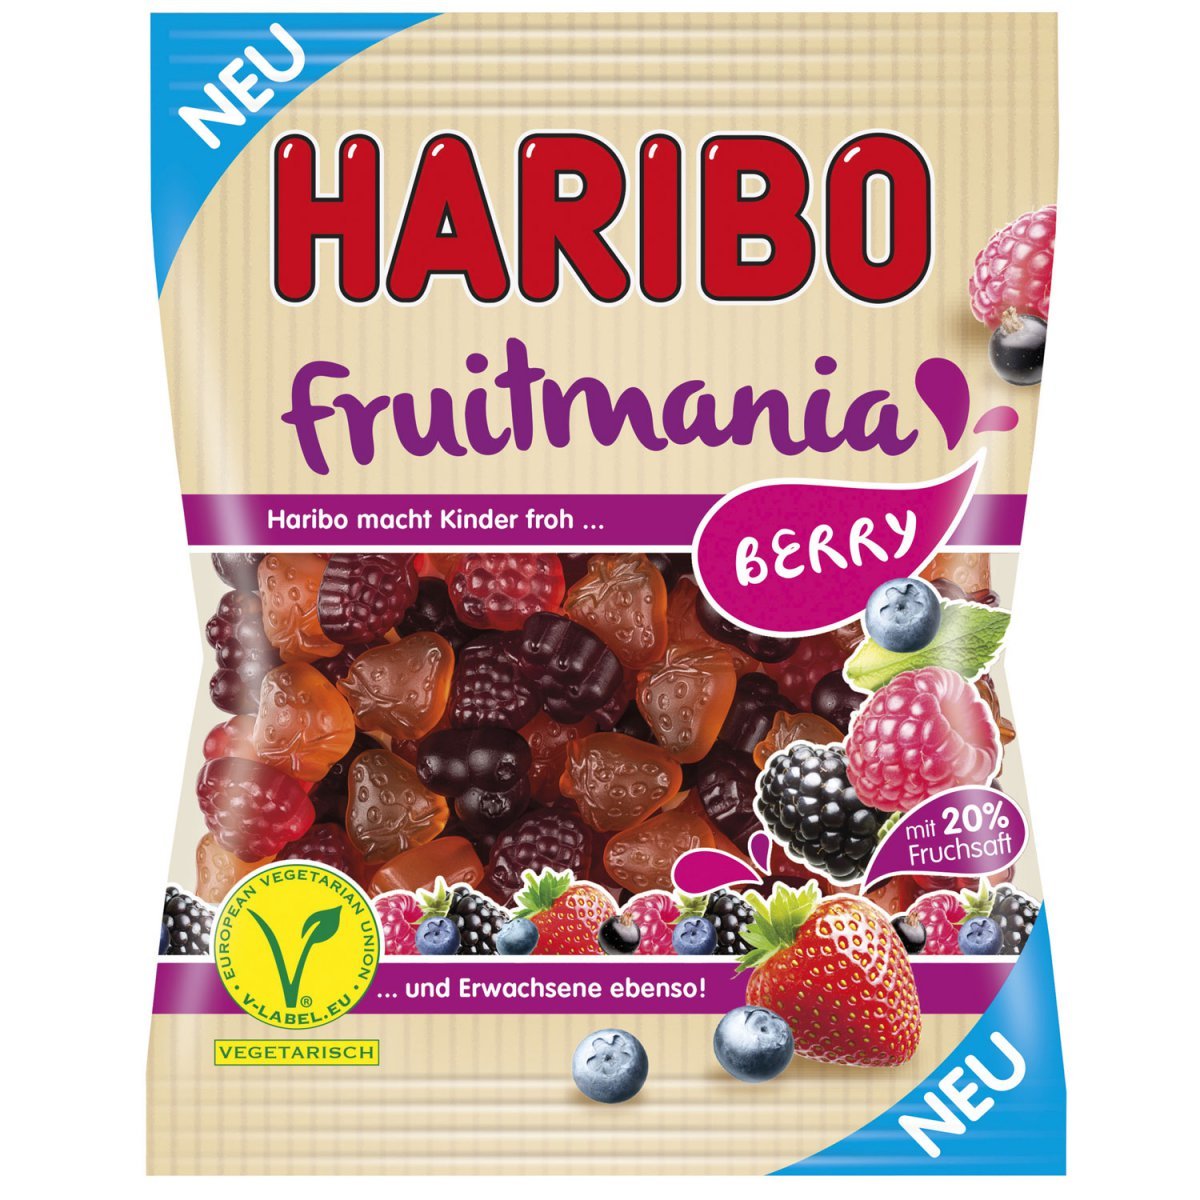 Primary image for Haribo - Fruitmania Berry Vegetarisch Gummy Candy 175g